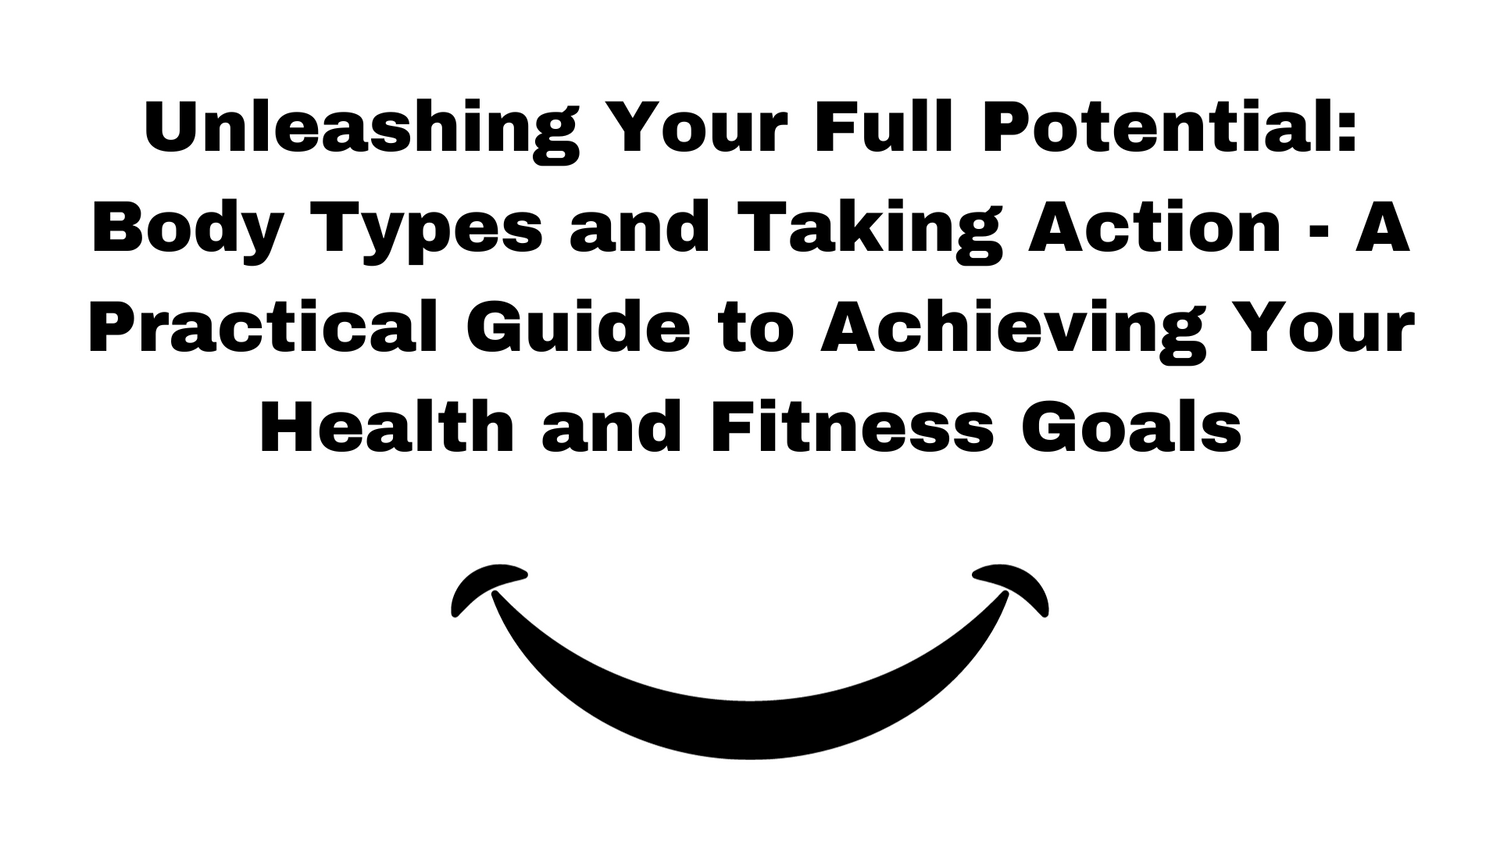 Unleashing Your Full Potential: Body Types and Taking Action - A Practical Guide to Achieving Your Health and Fitness Goals